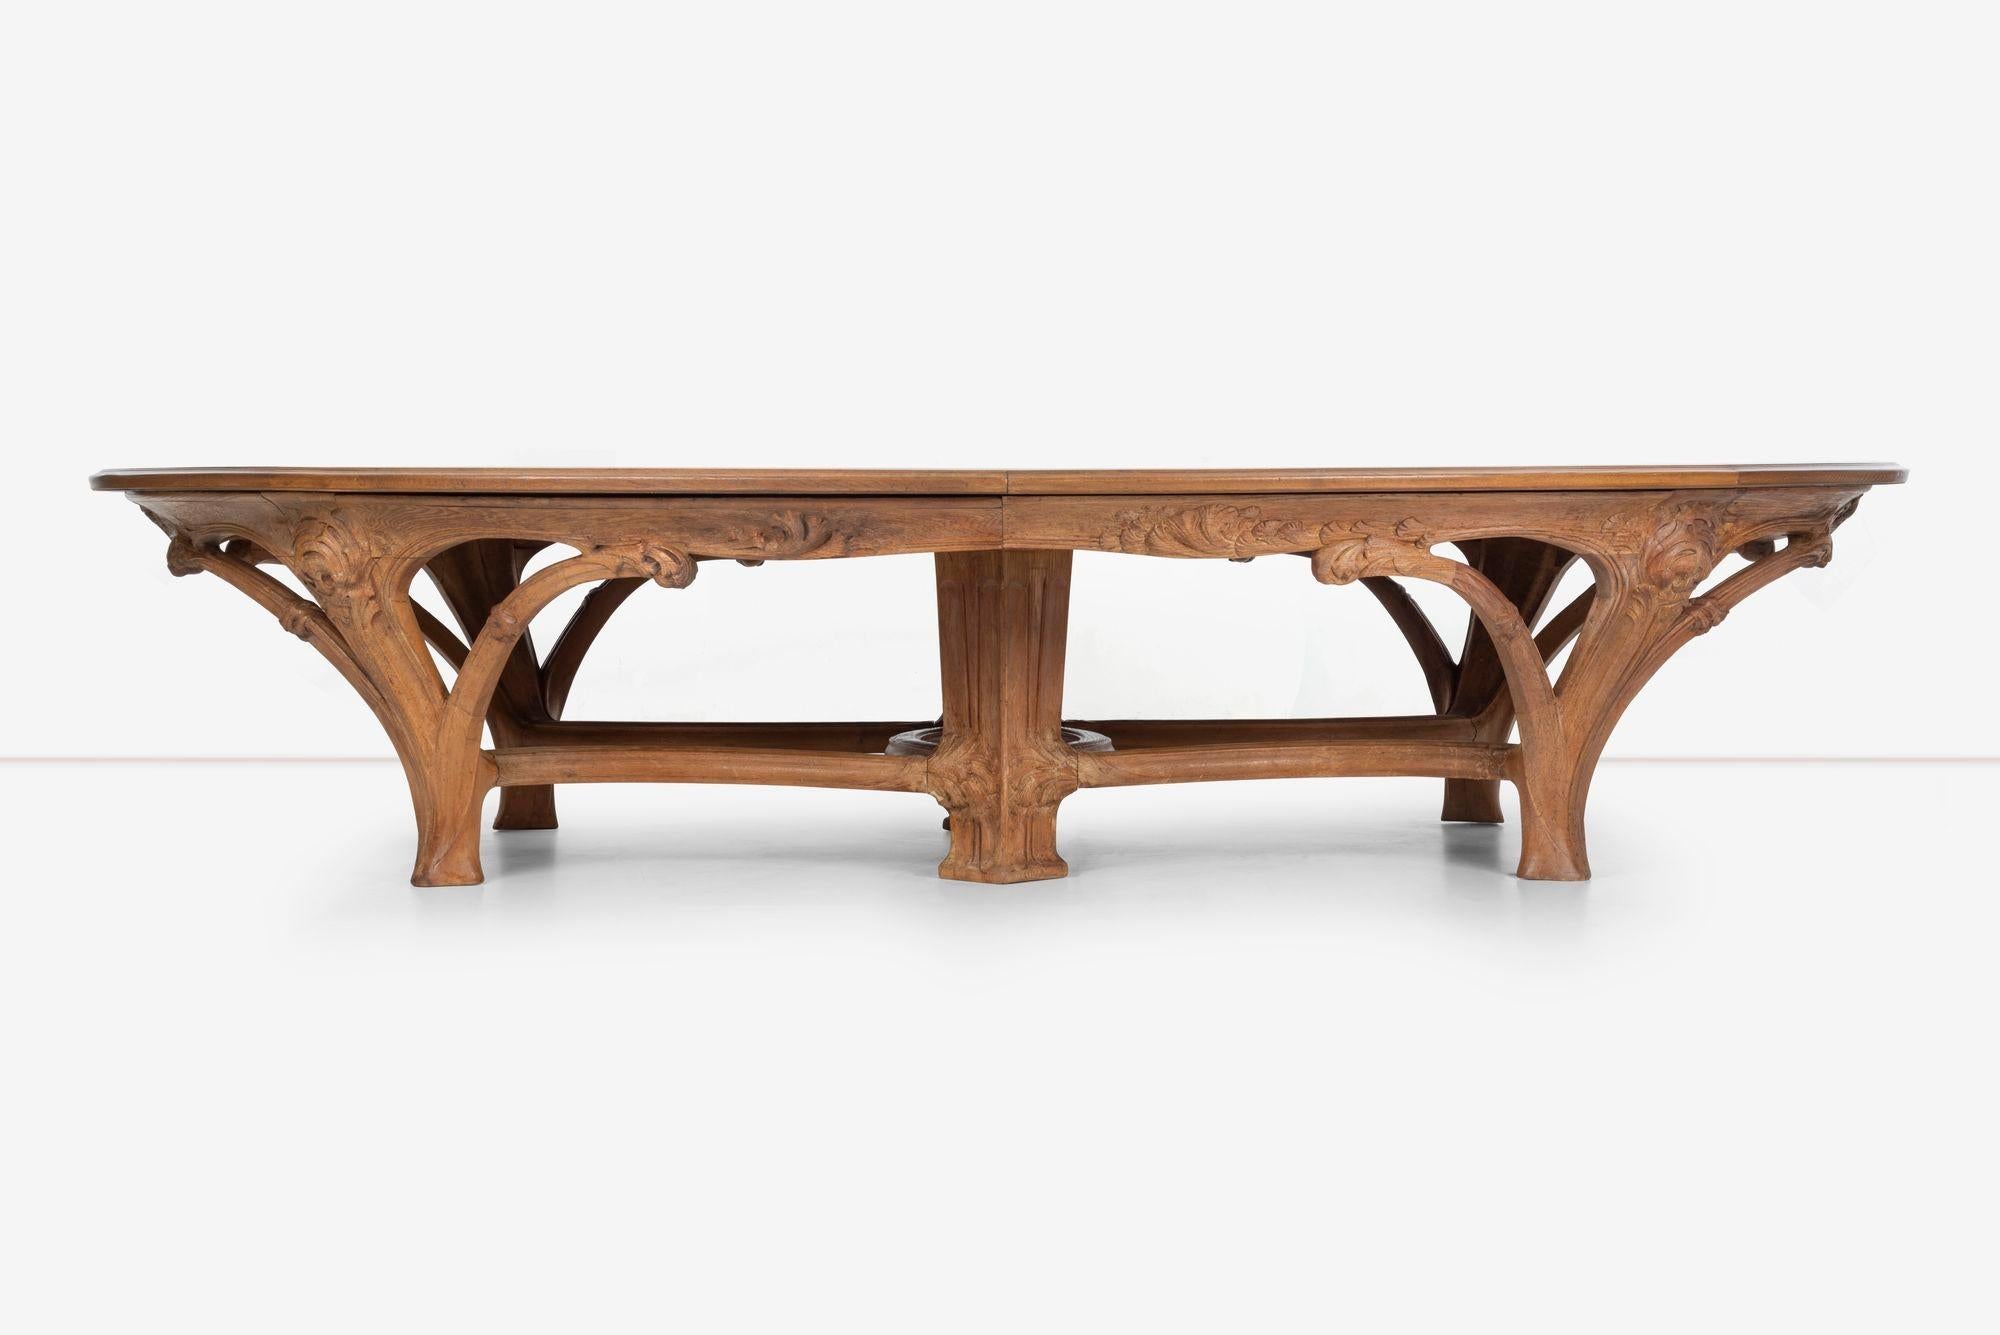 John Dickinson selected this table as the centerpiece Table for The Firehouse with the help of MoMA curator Peter Selz, who had curated the re-examination of Art Nouveau at MoMA in 1960 before moving to Berkeley and founded the Berkeley Art Museum.